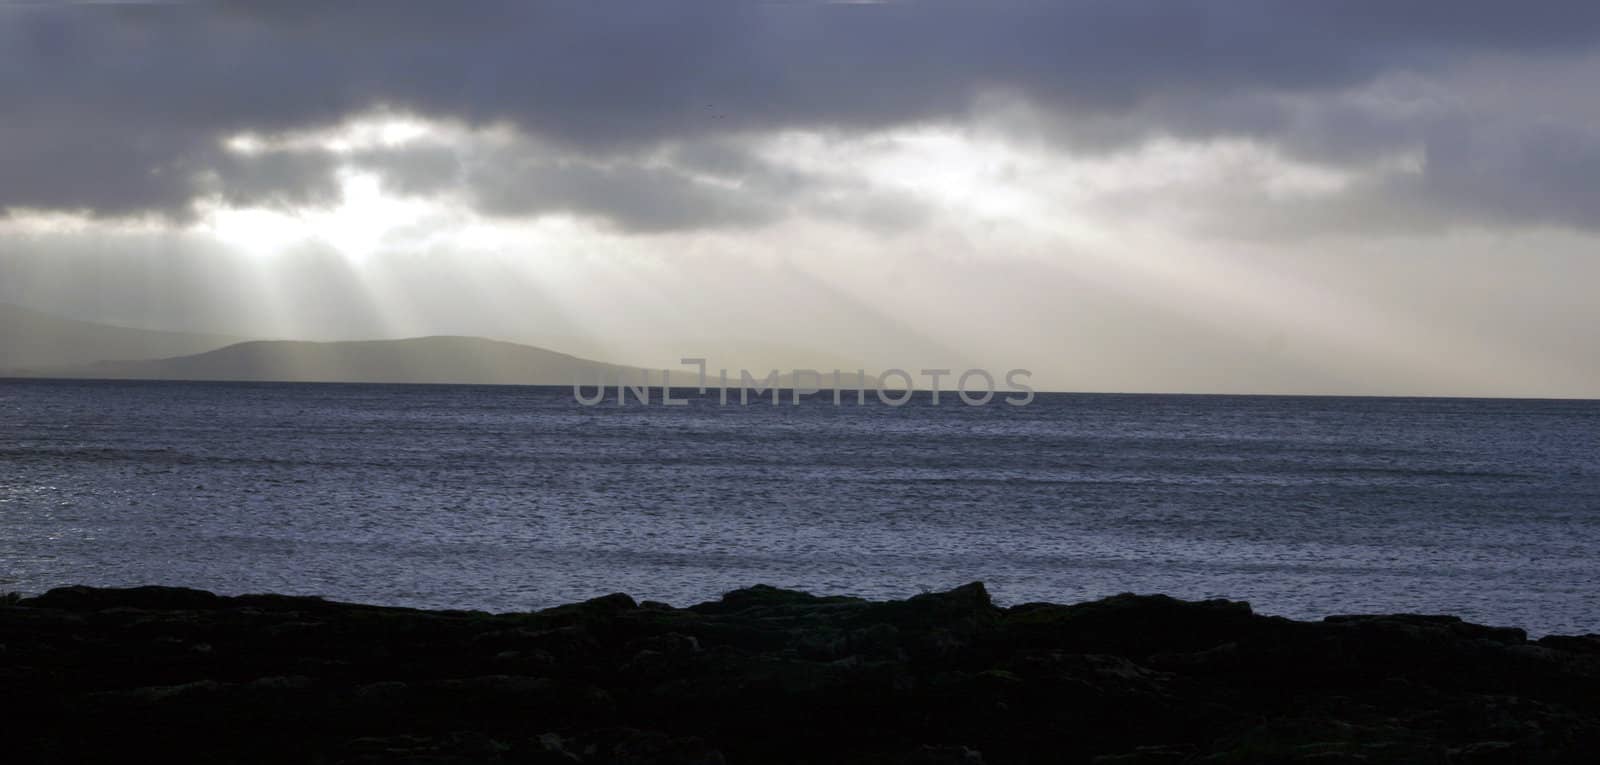 The scottish island of Arran at a stormy day, seen from the western coast of the mainland (Mull), sun rays or beams over the sea